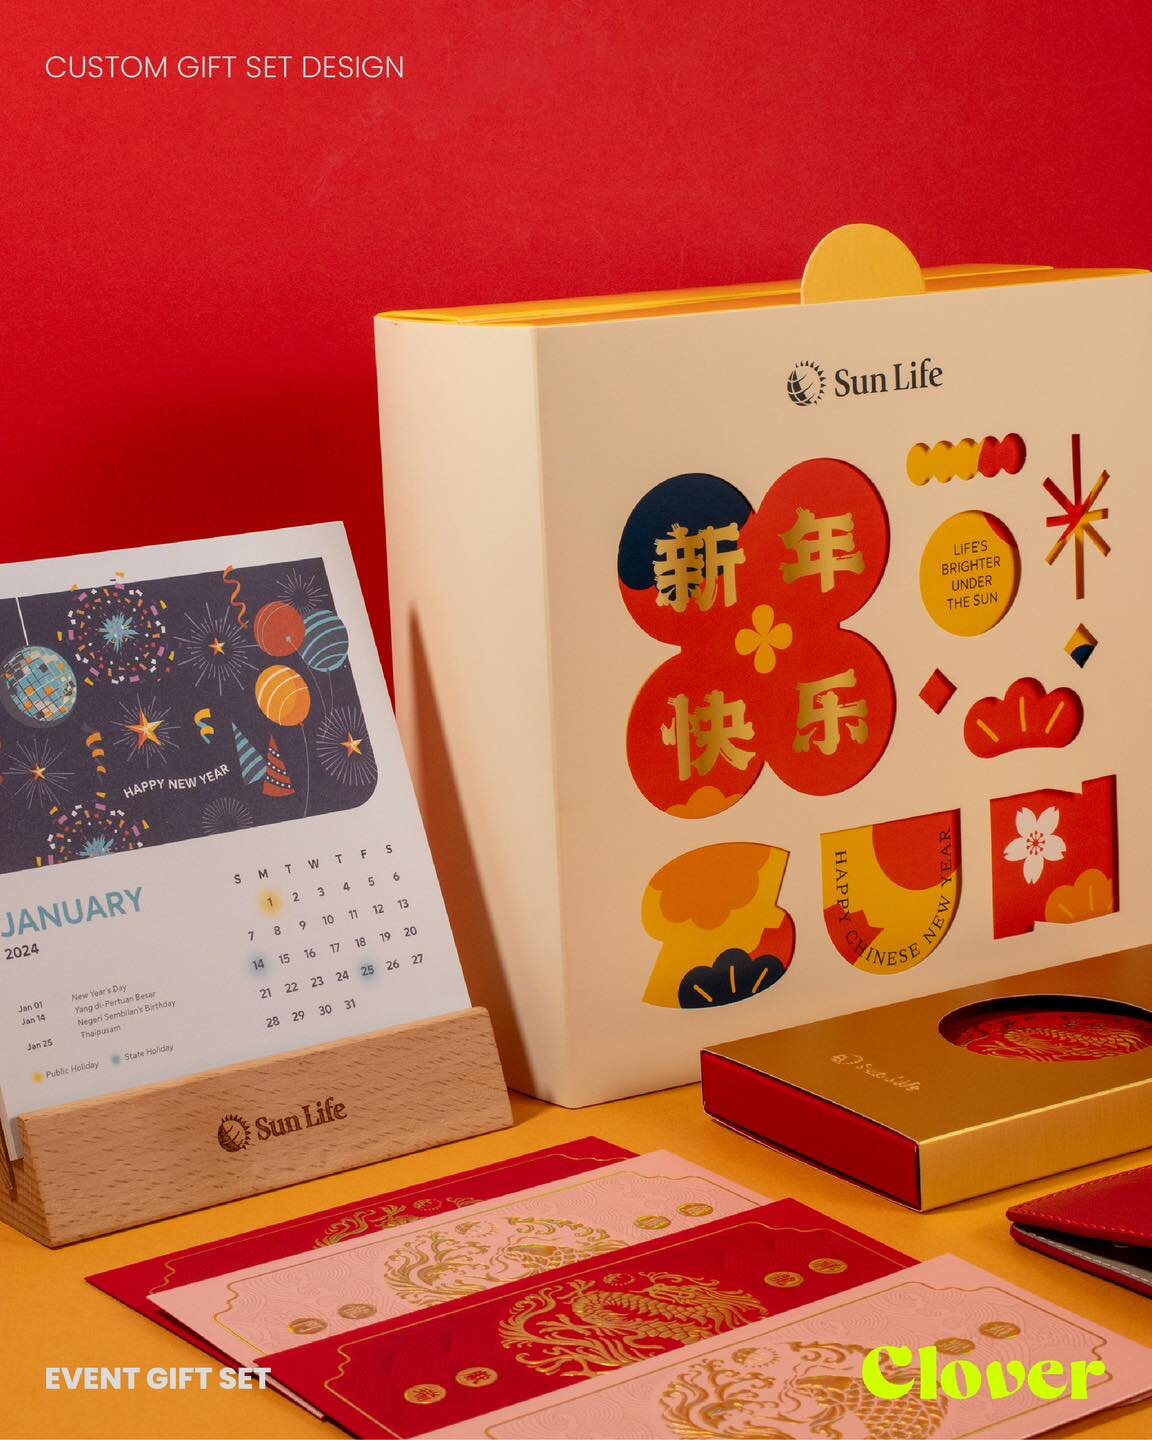 Unwrapping happiness with our Sunlife Gift Set design! 🌟🎁 

Swipe left to explore our captivating designs, featuring exquisite gift boxes, calendars, and exclusive Chinese New Year ang paus.

Ready to infuse your brand with our distinctive touch? 
